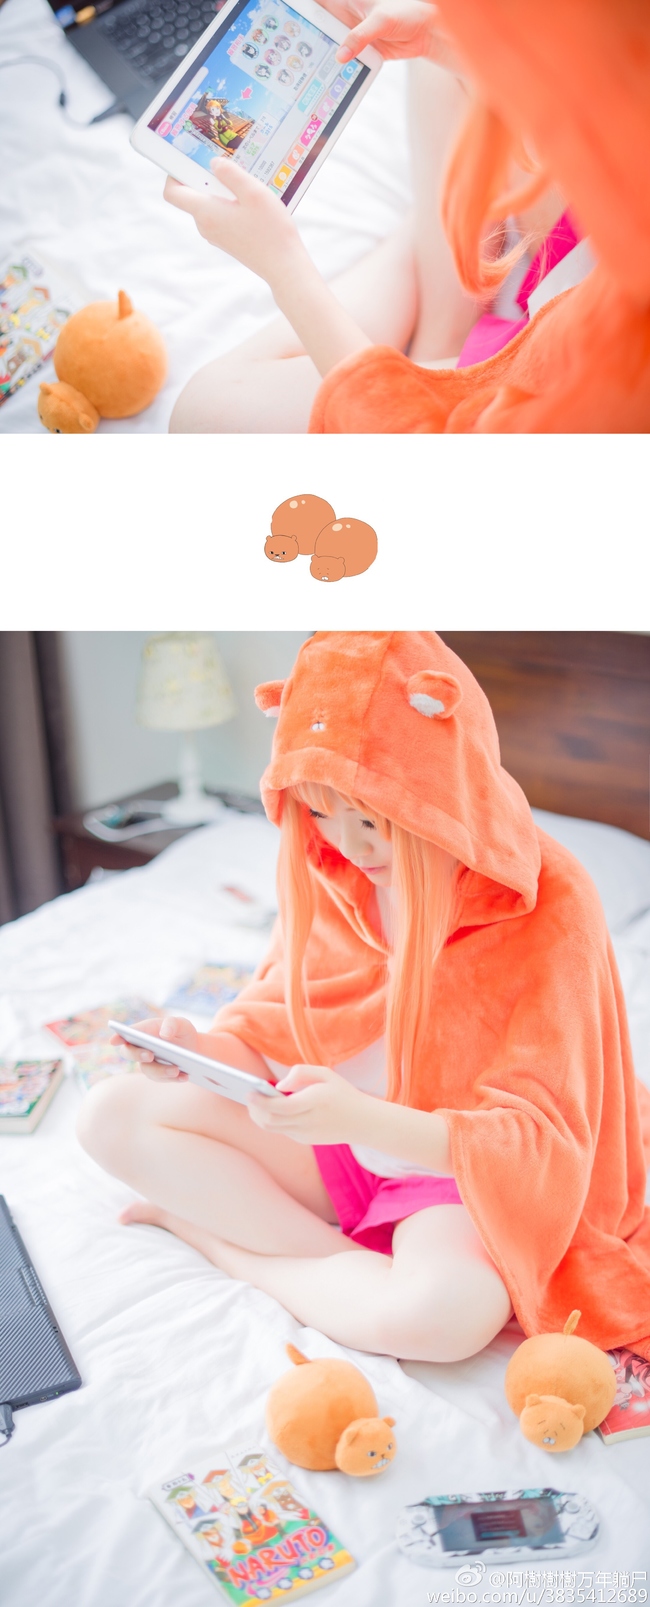 This Umaru Cosplayer Will Make You Never Want to Leave Your Room4